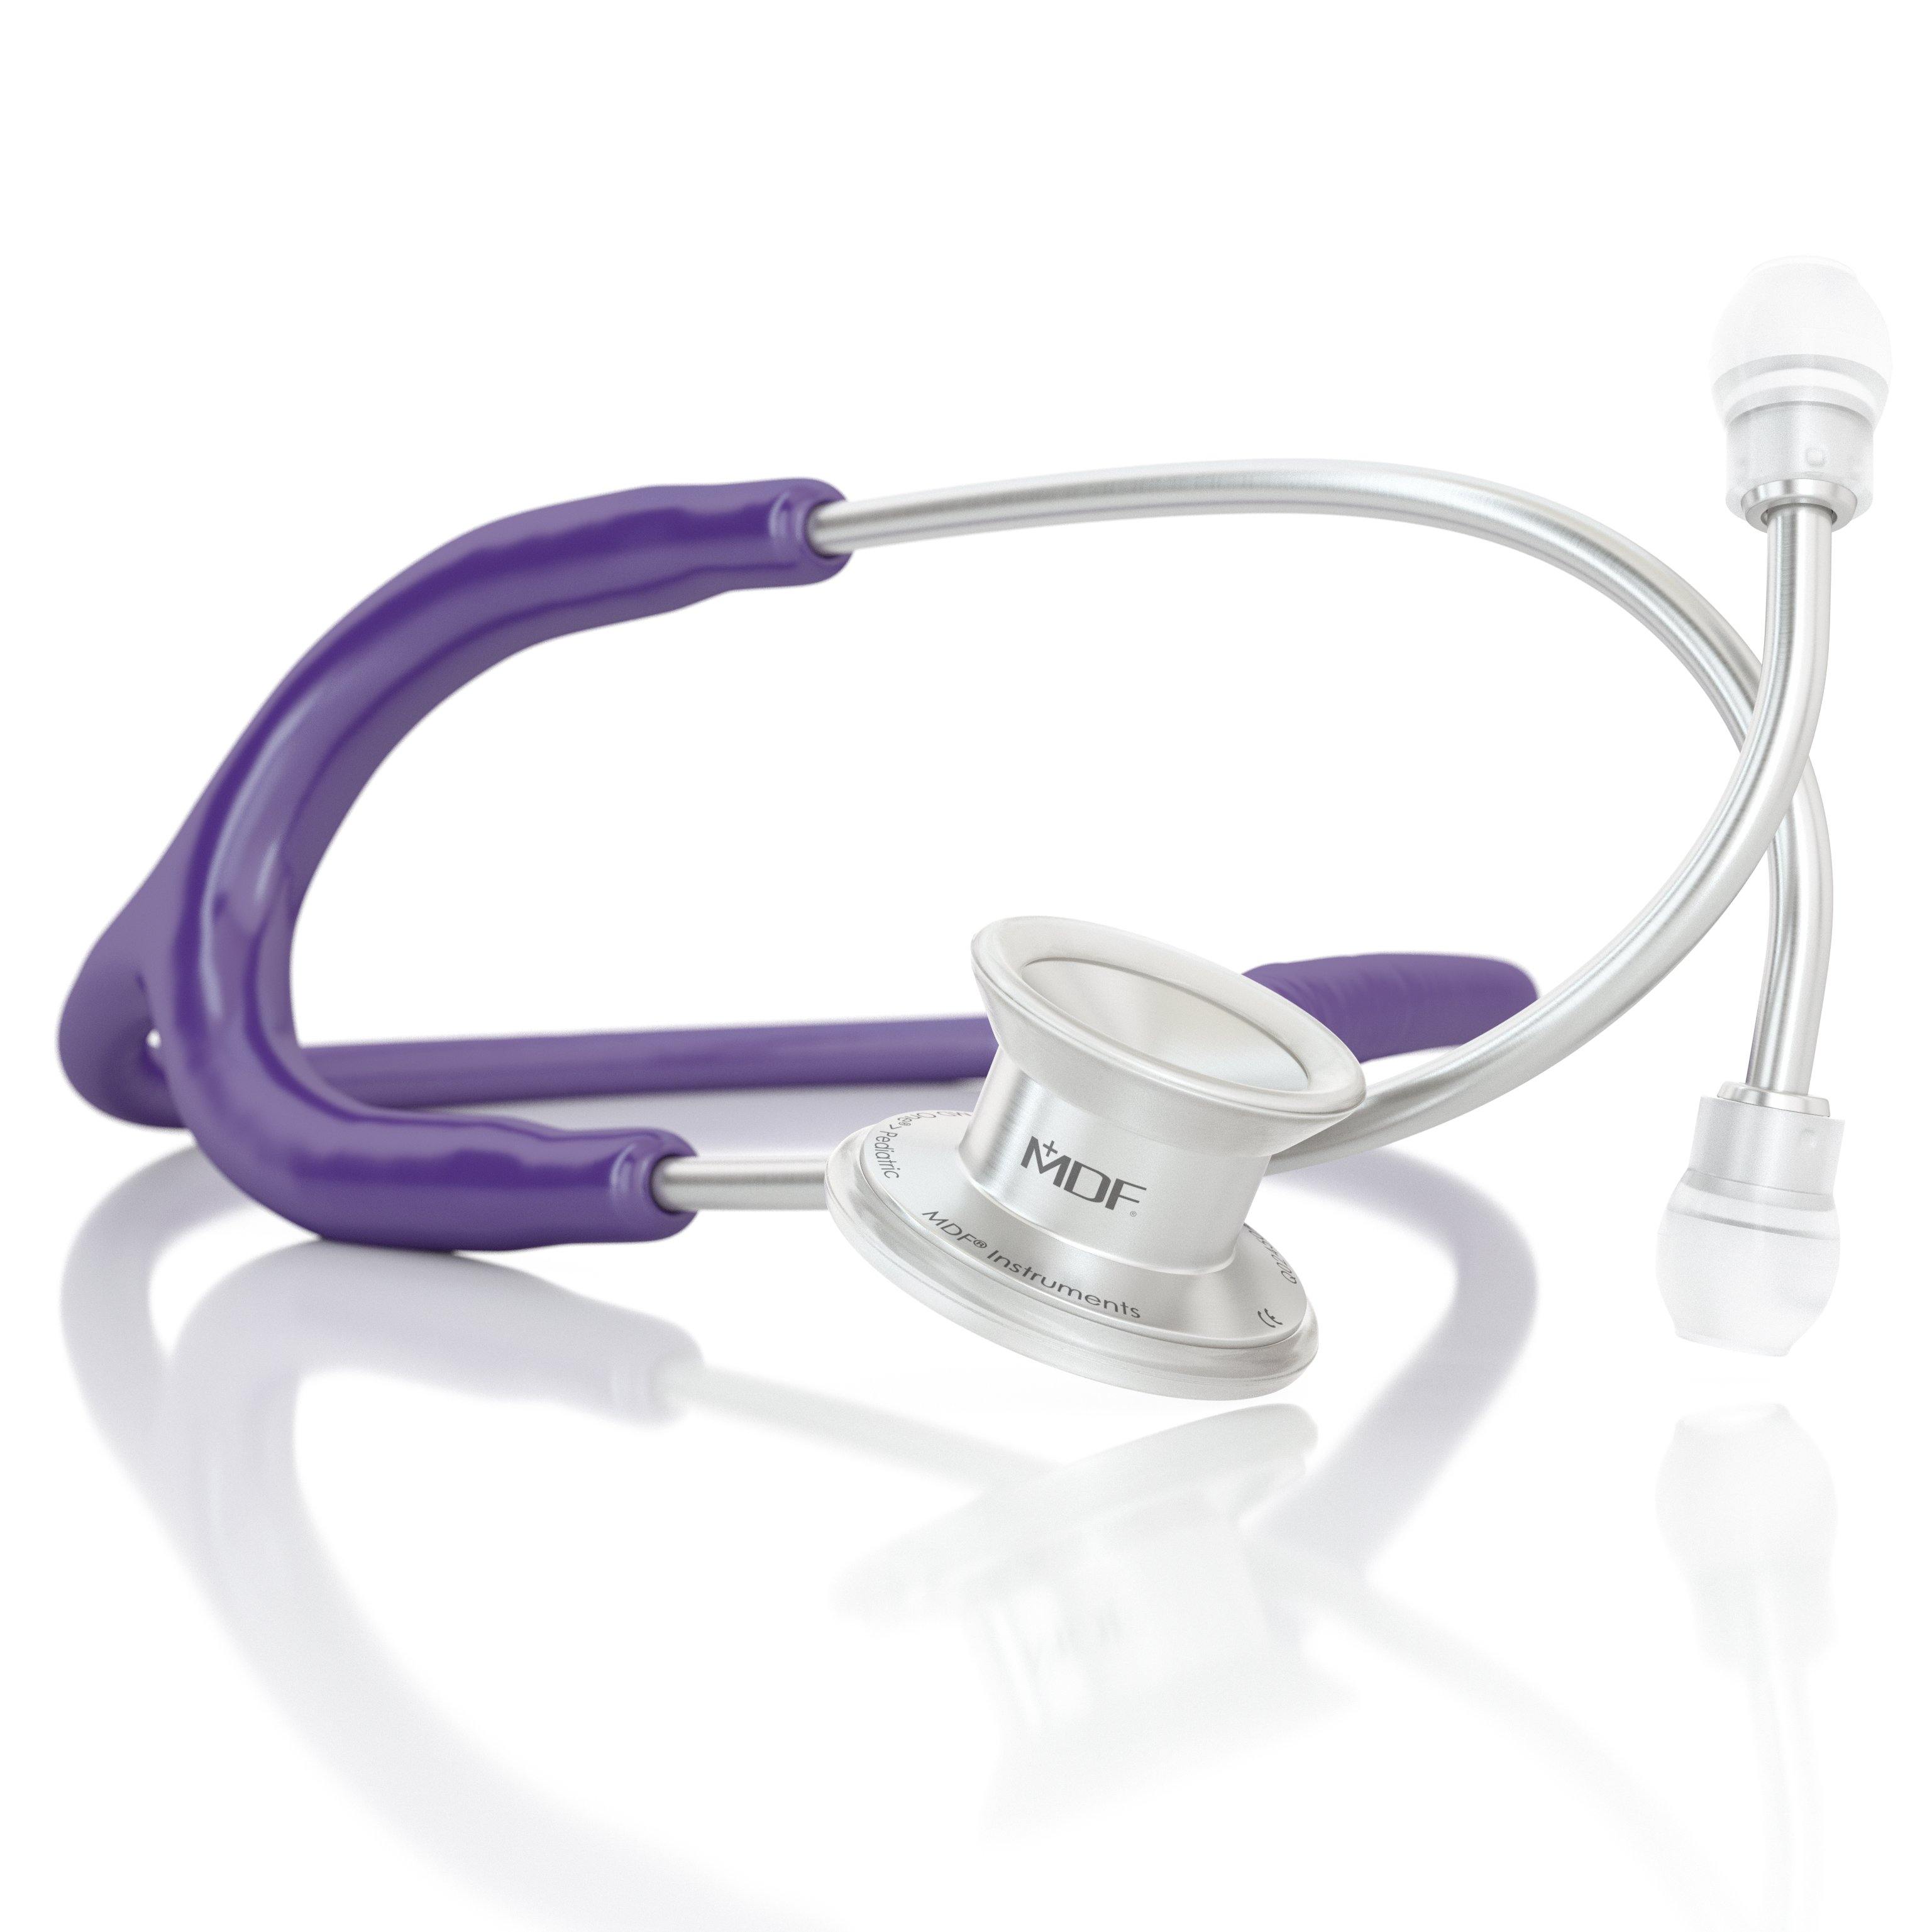 MD One® Pediatric Stethoscope - Purple - MDF Instruments Official Store - Stethoscope